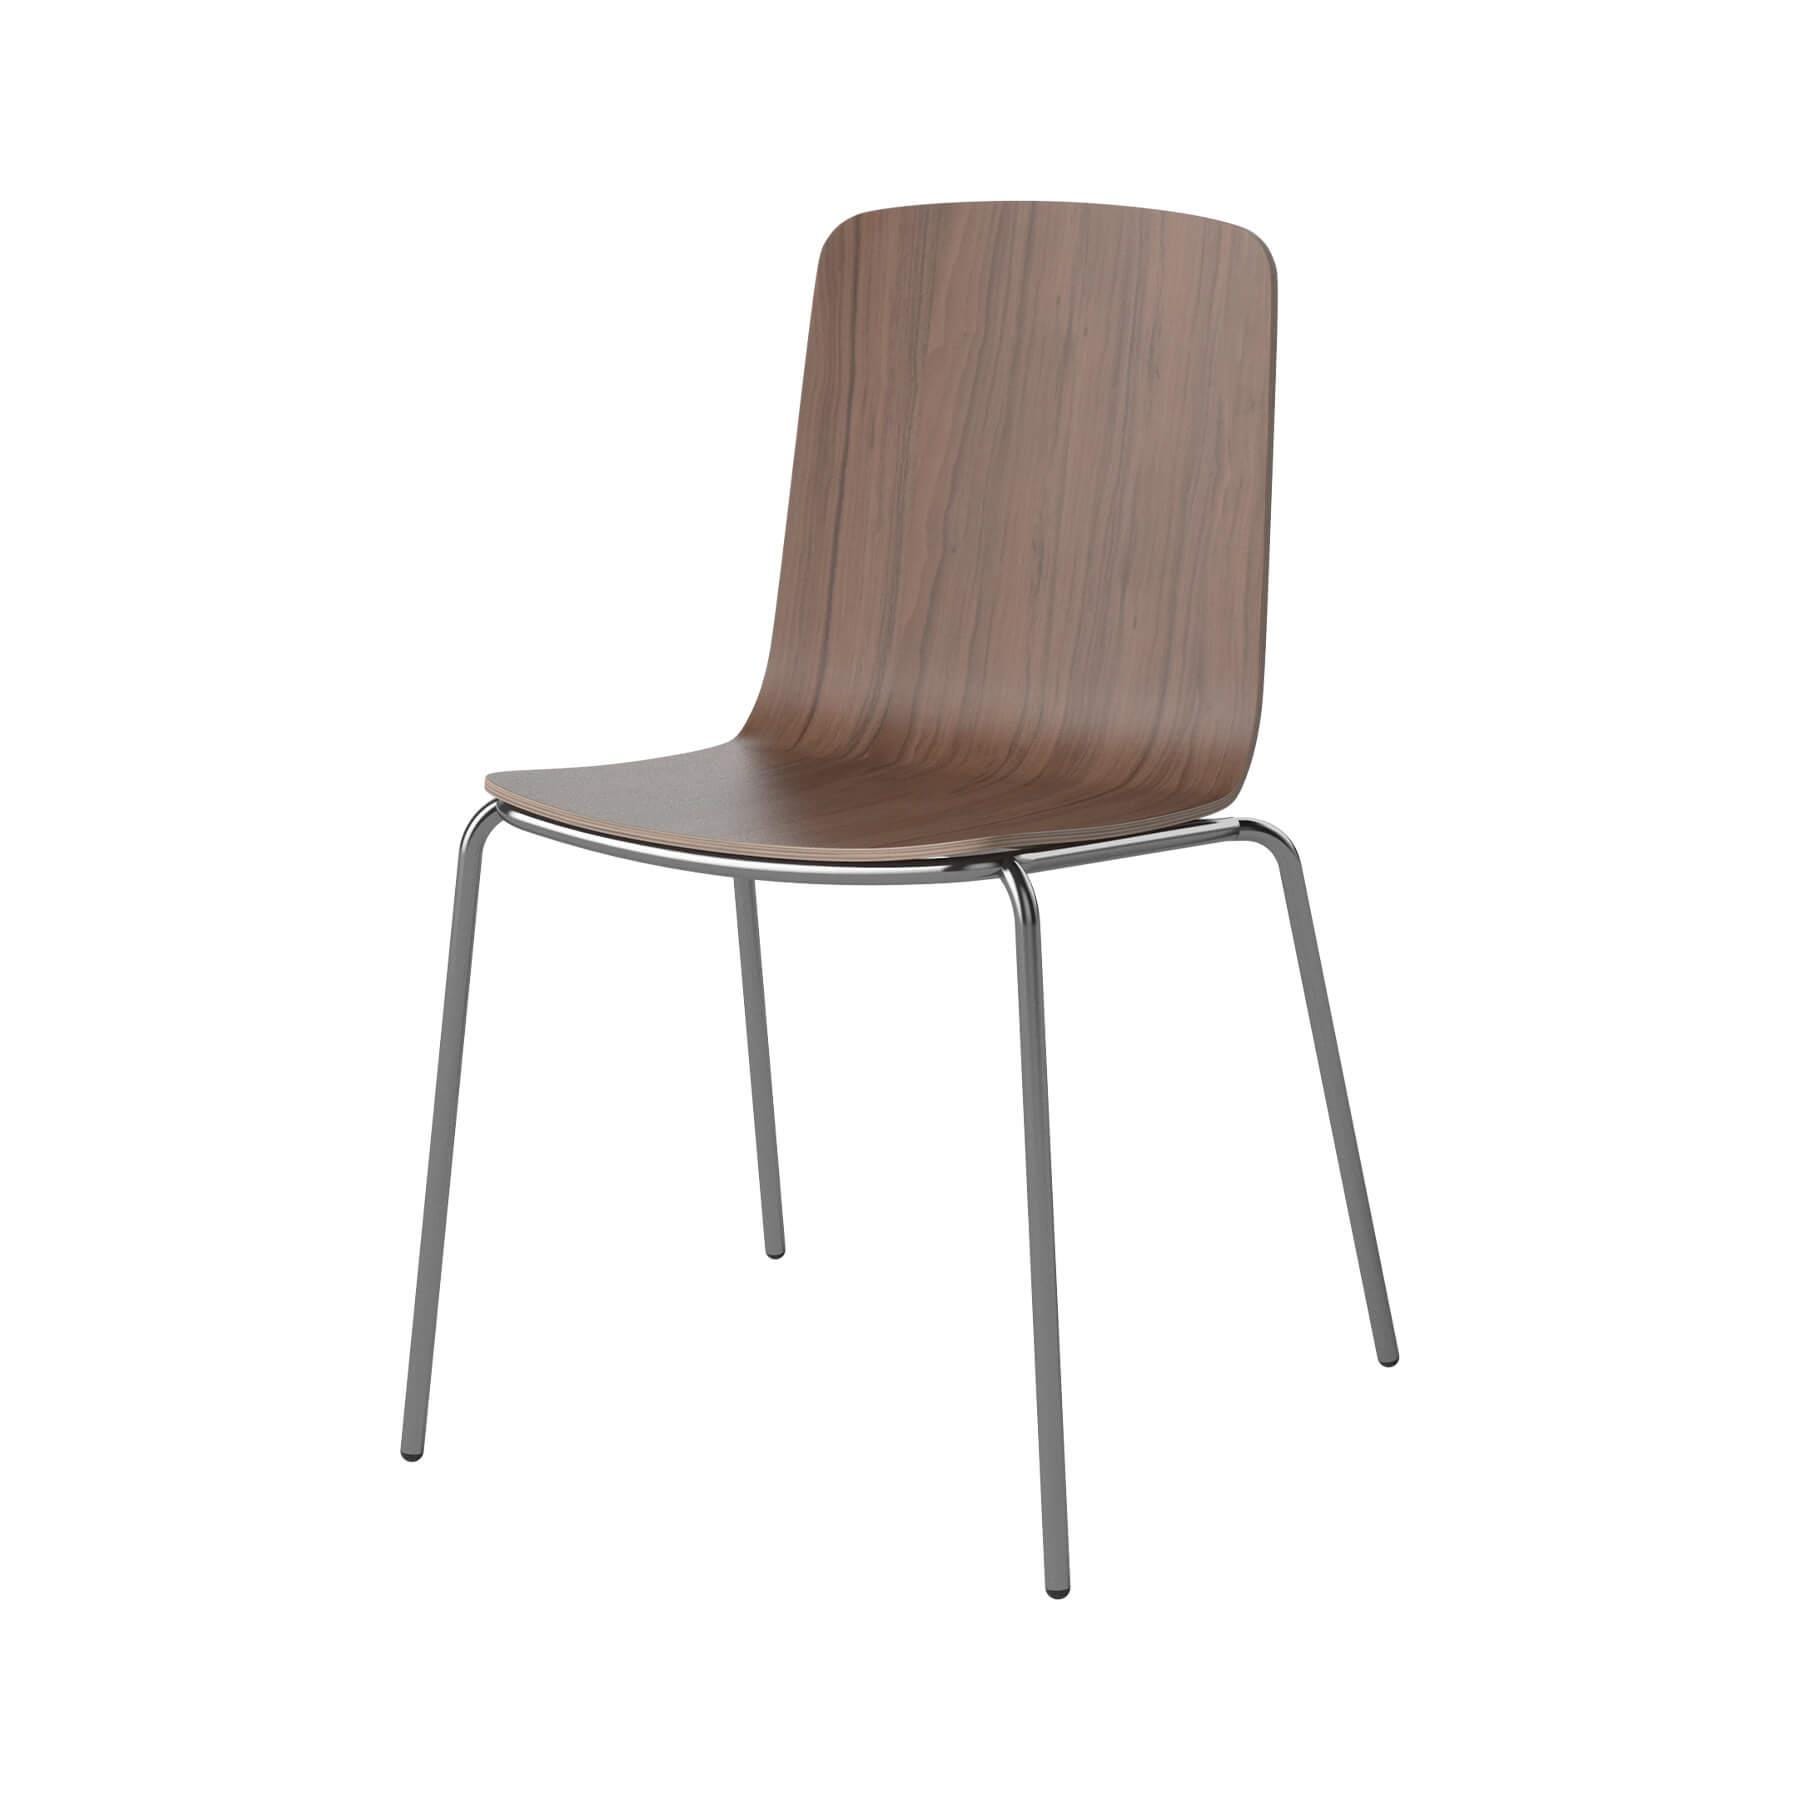 Bolia Palm Dining Chair Metal Legs Oiled Walnut Chrome Plated Legs Dark Wood Designer Furniture From Holloways Of Ludlow